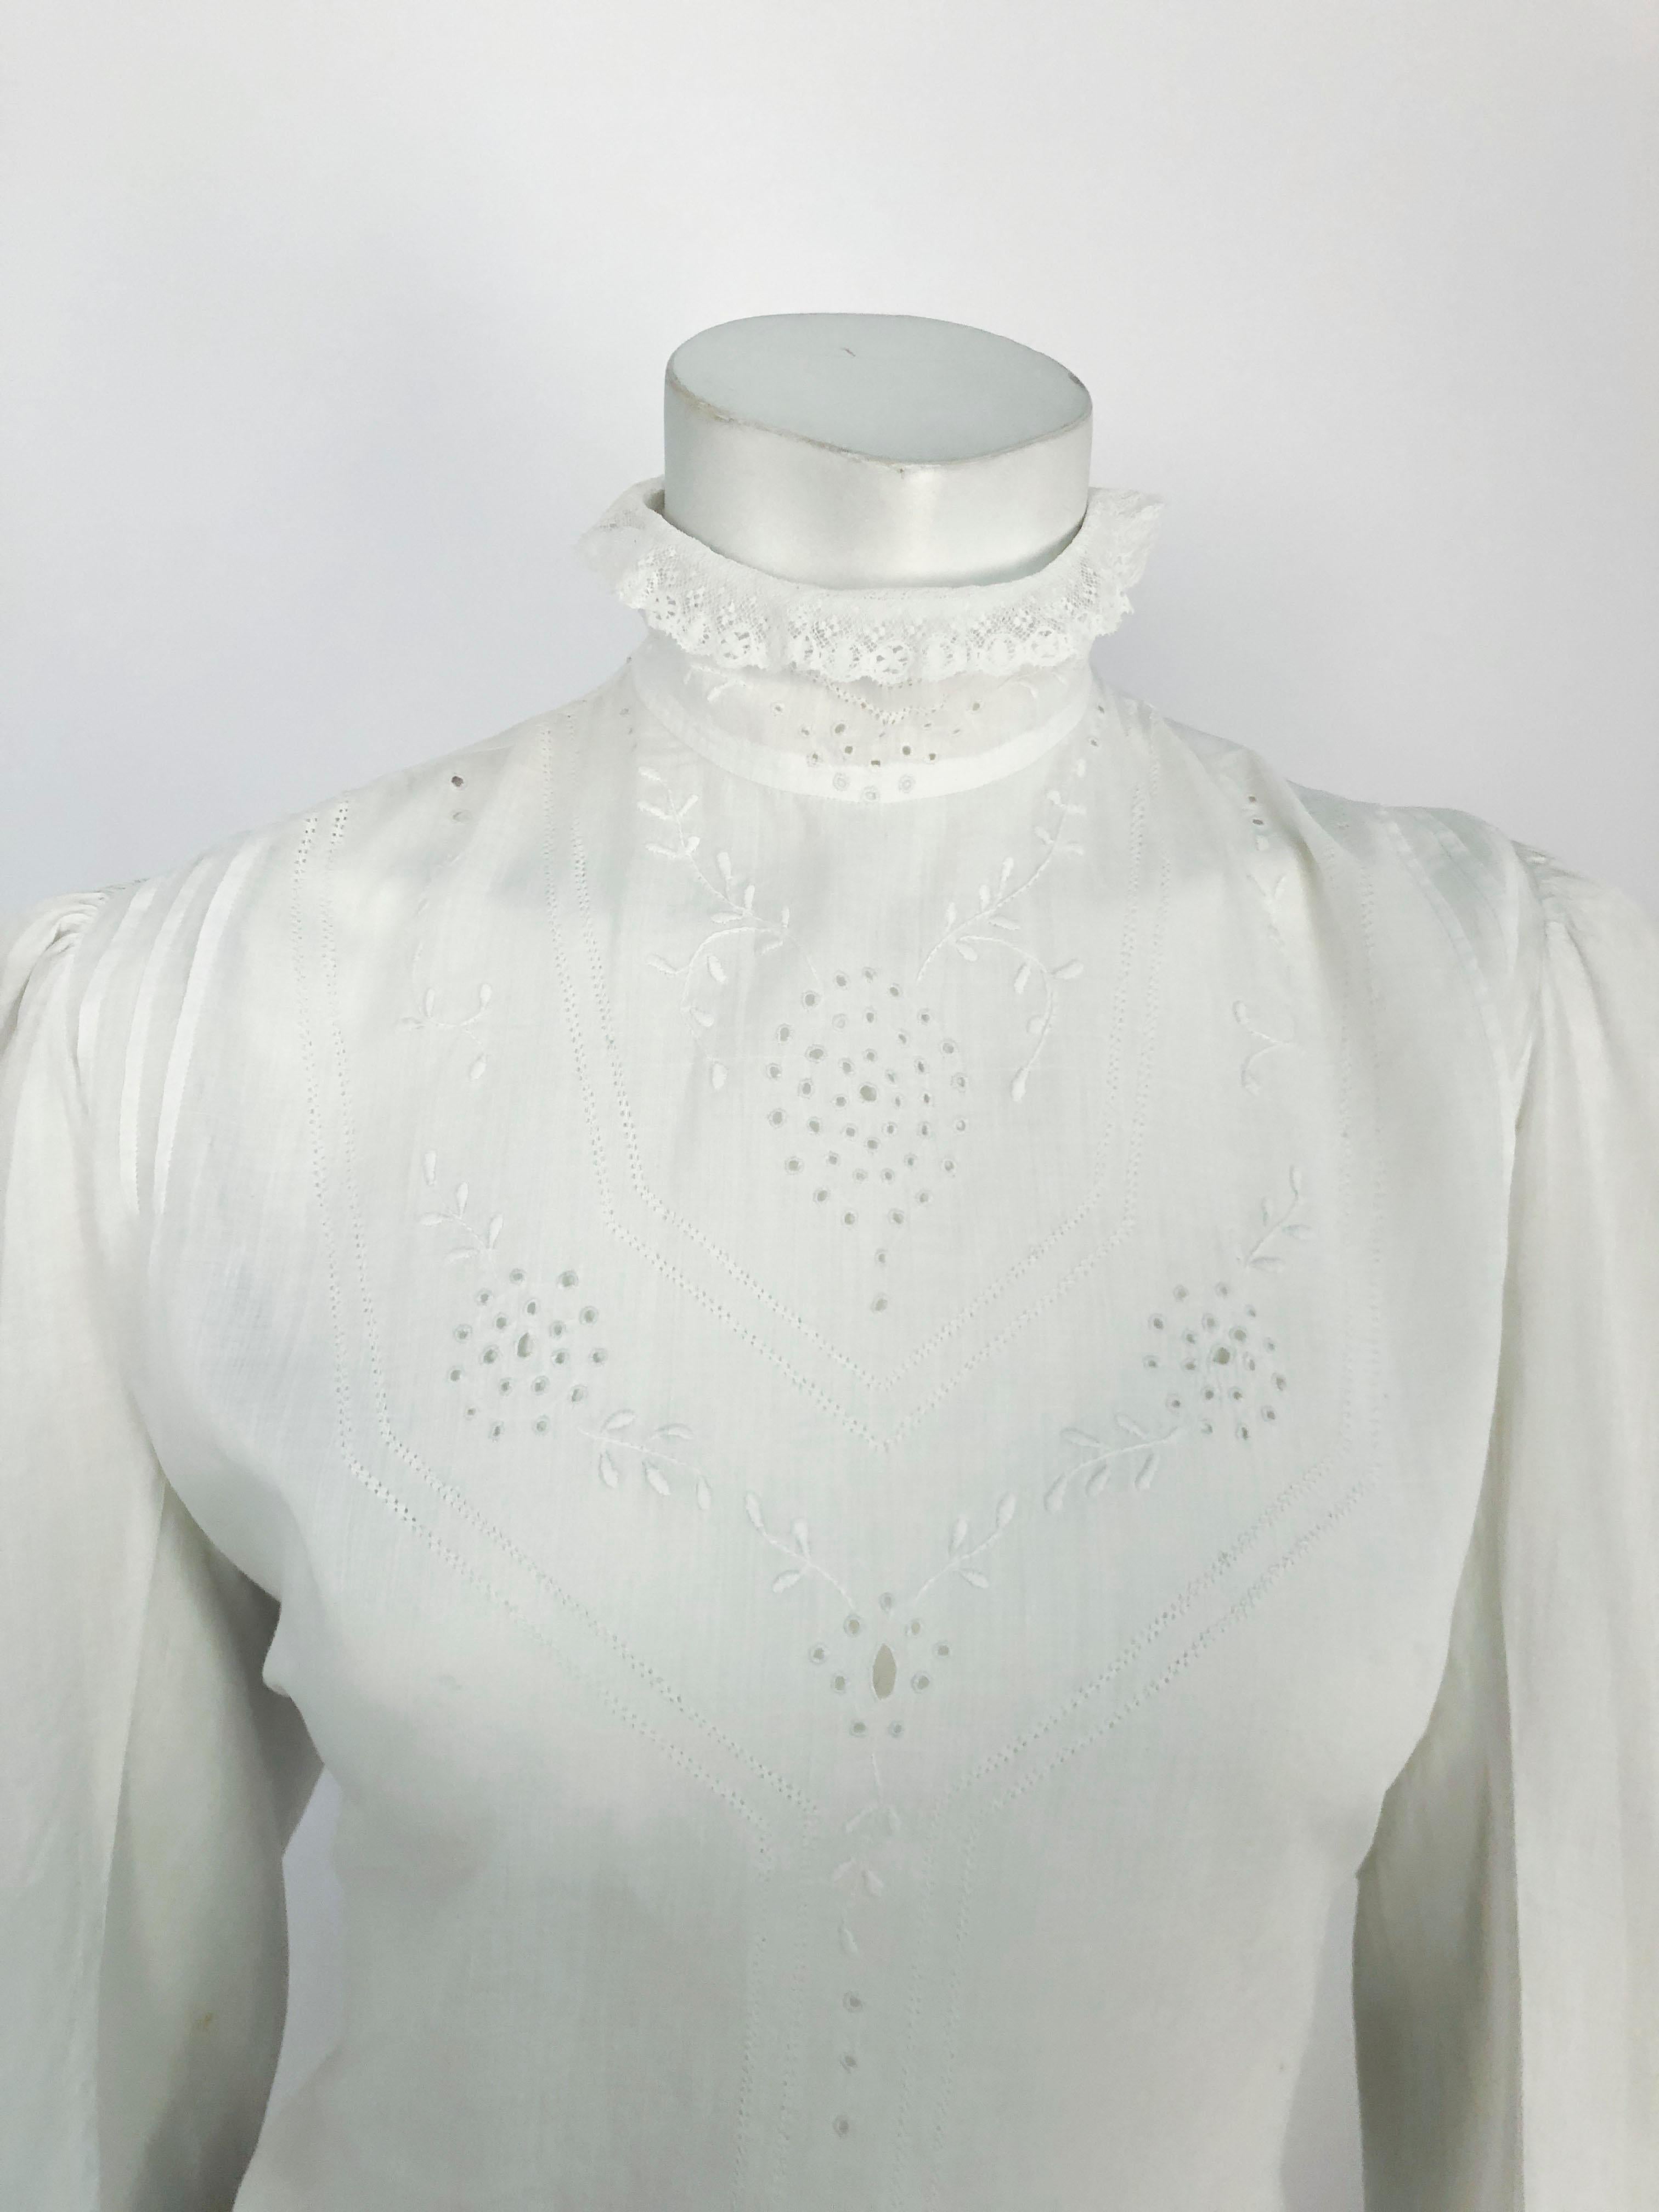 Edwardian white day blouse made of a thin lawn cotton with fine embroidery and pull work. There is lace trimming along the sleeves and high neckline. The waist is fitted with drawstrings that tie and traditionally hidden by skirt or sash. This piece